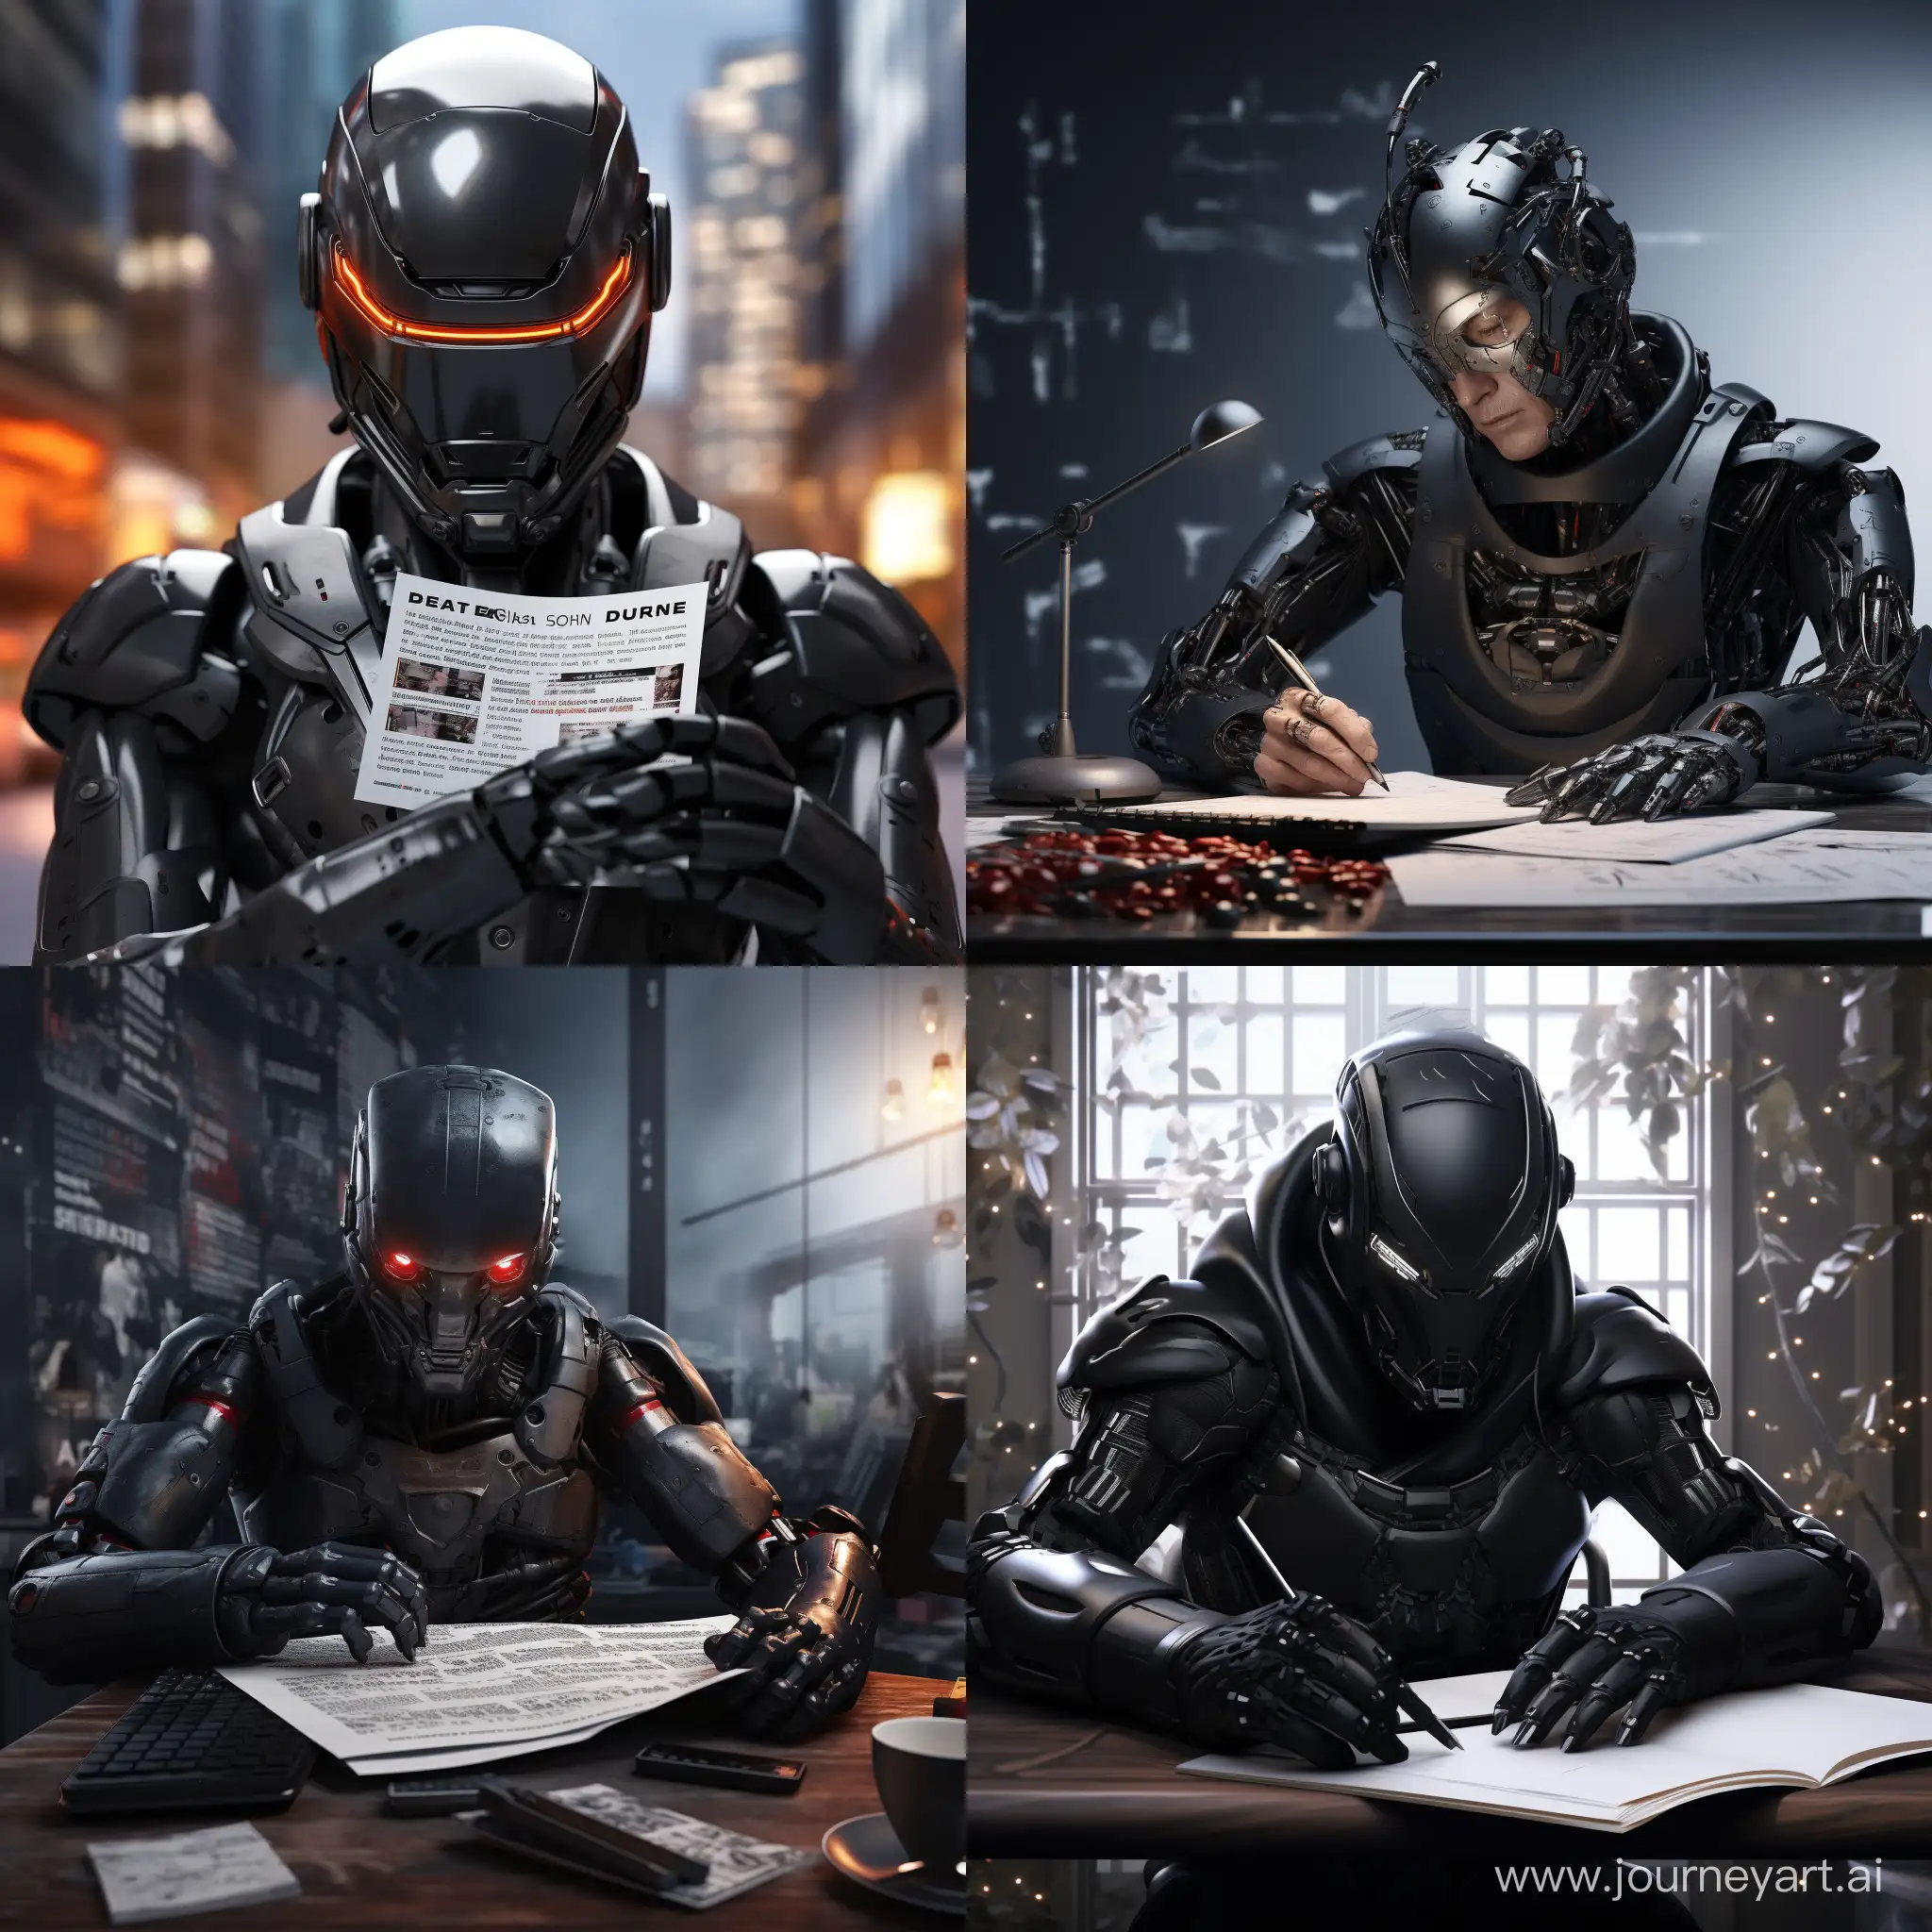 Black-Robot-Writing-News-in-Realistic-Portrait-with-Light-Background